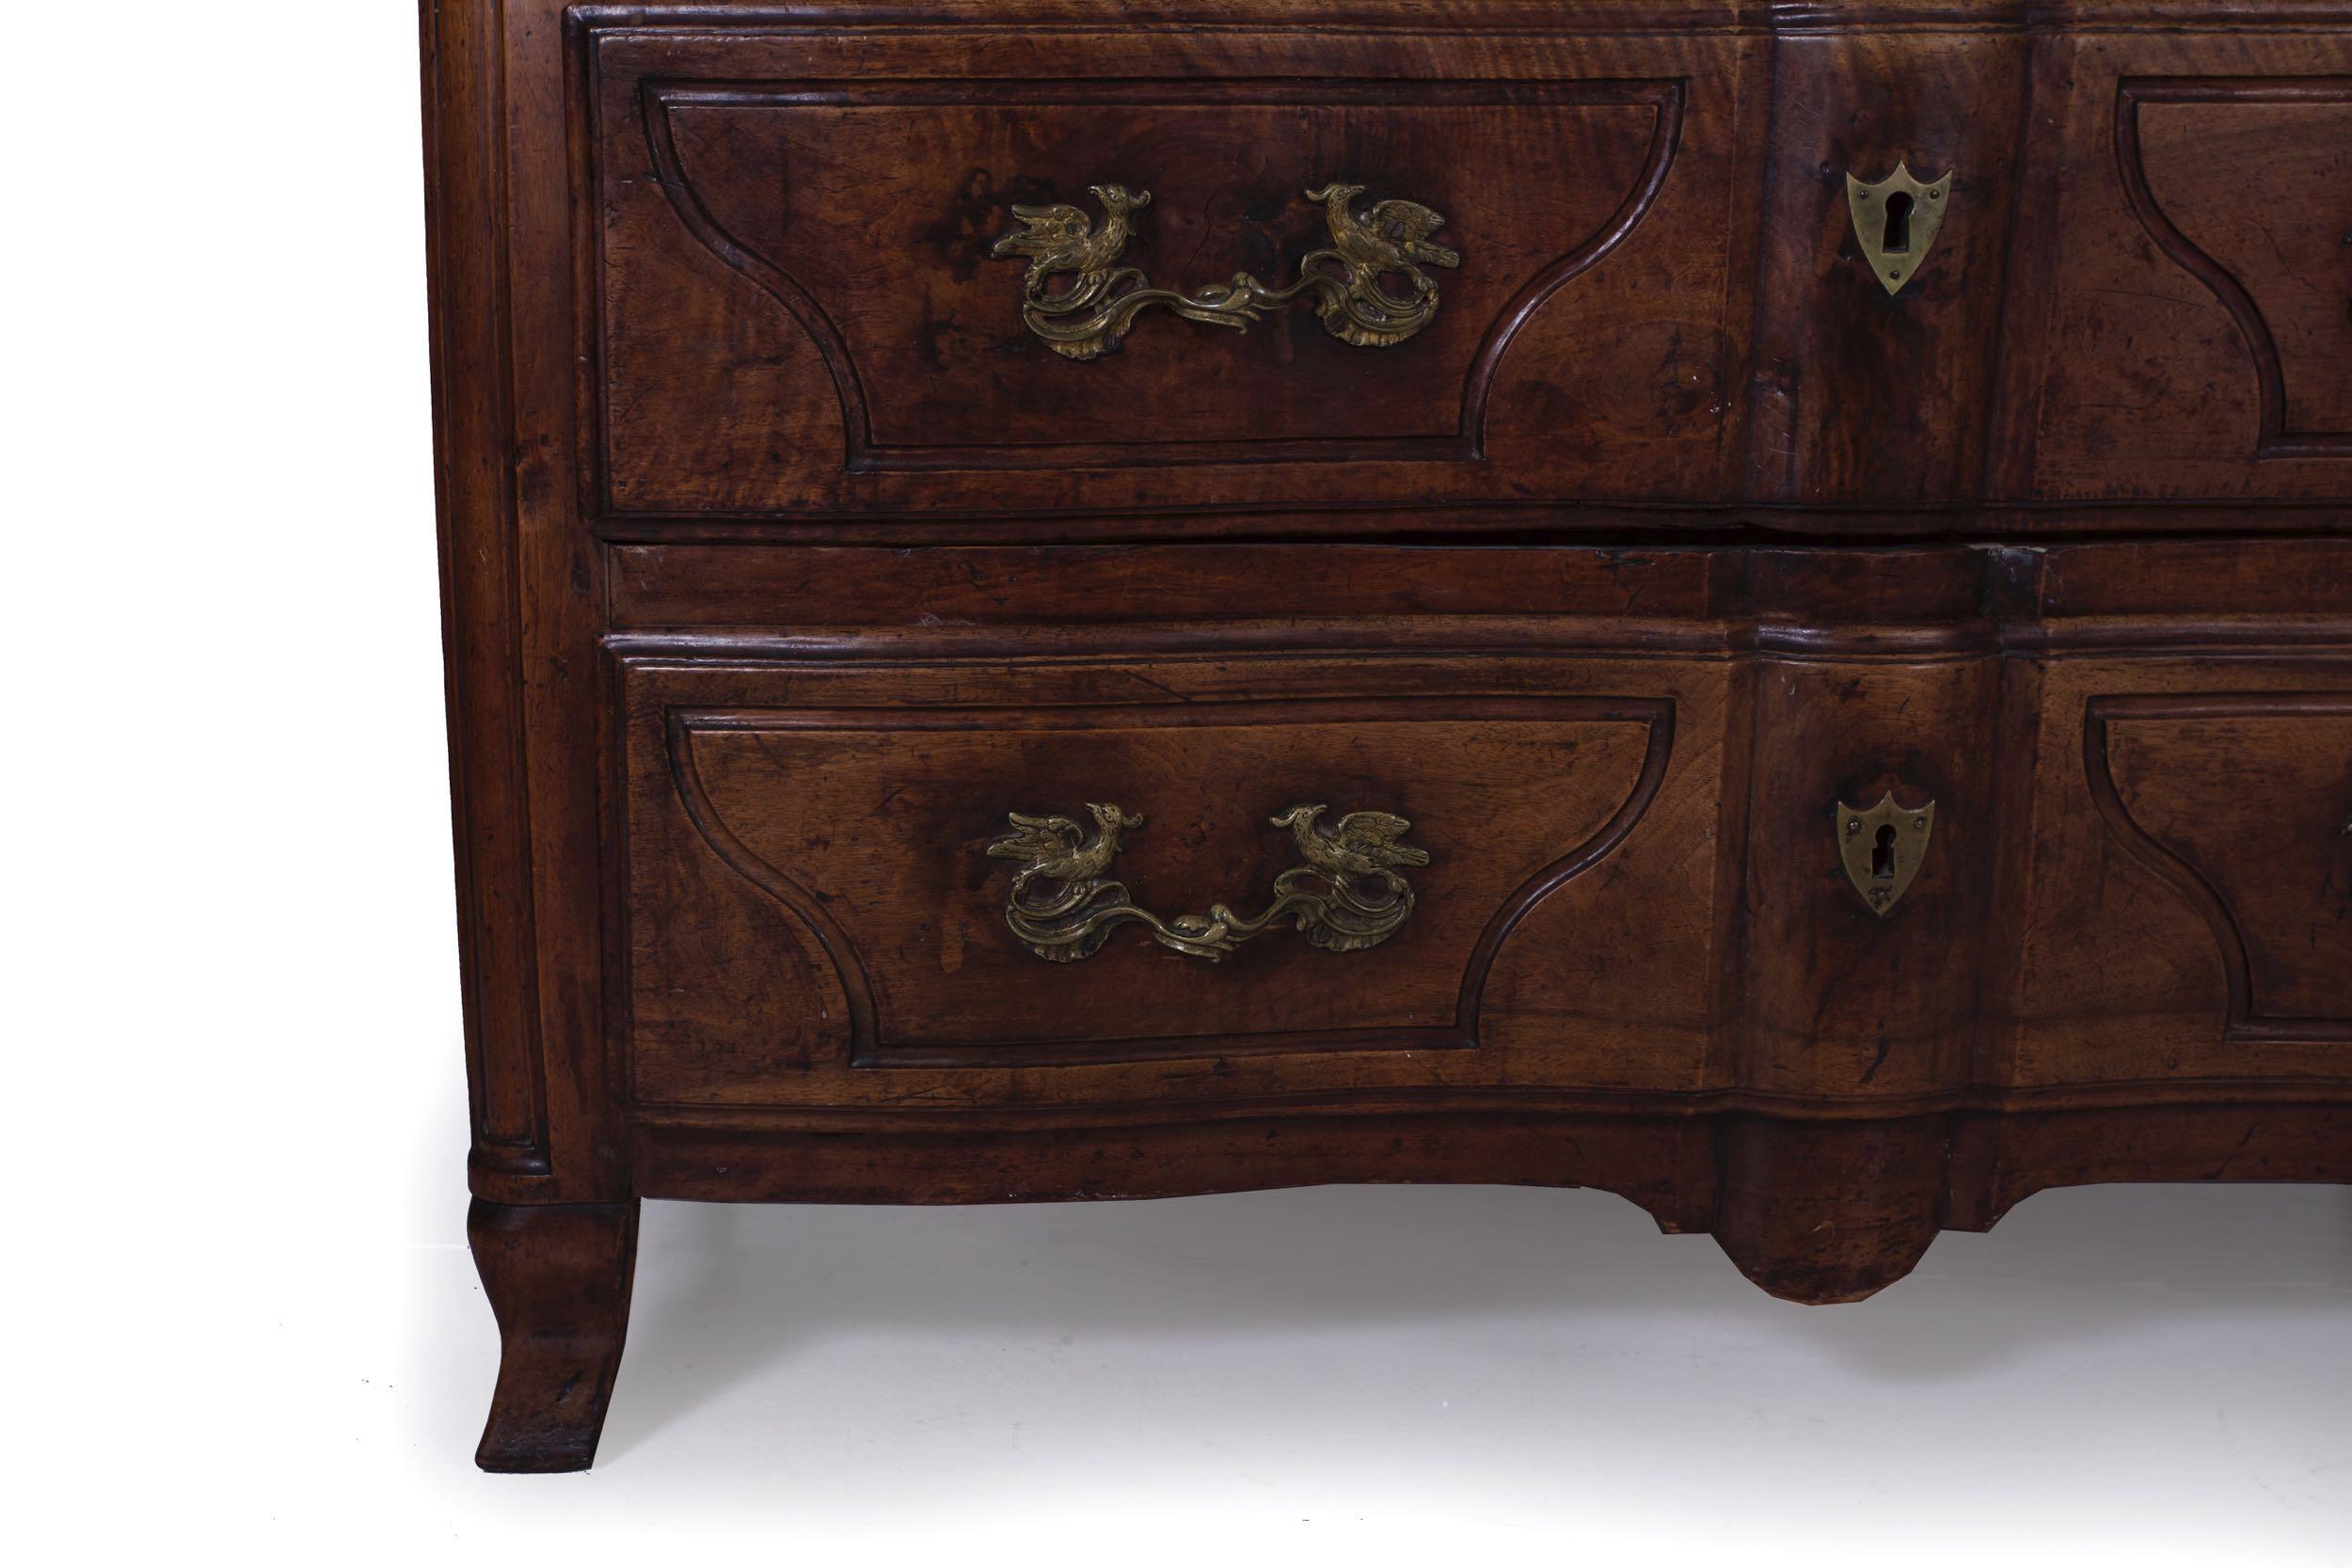 18th Century Regencé Period Walnut Commode Chest of Drawers, circa 1730-1750 For Sale 4